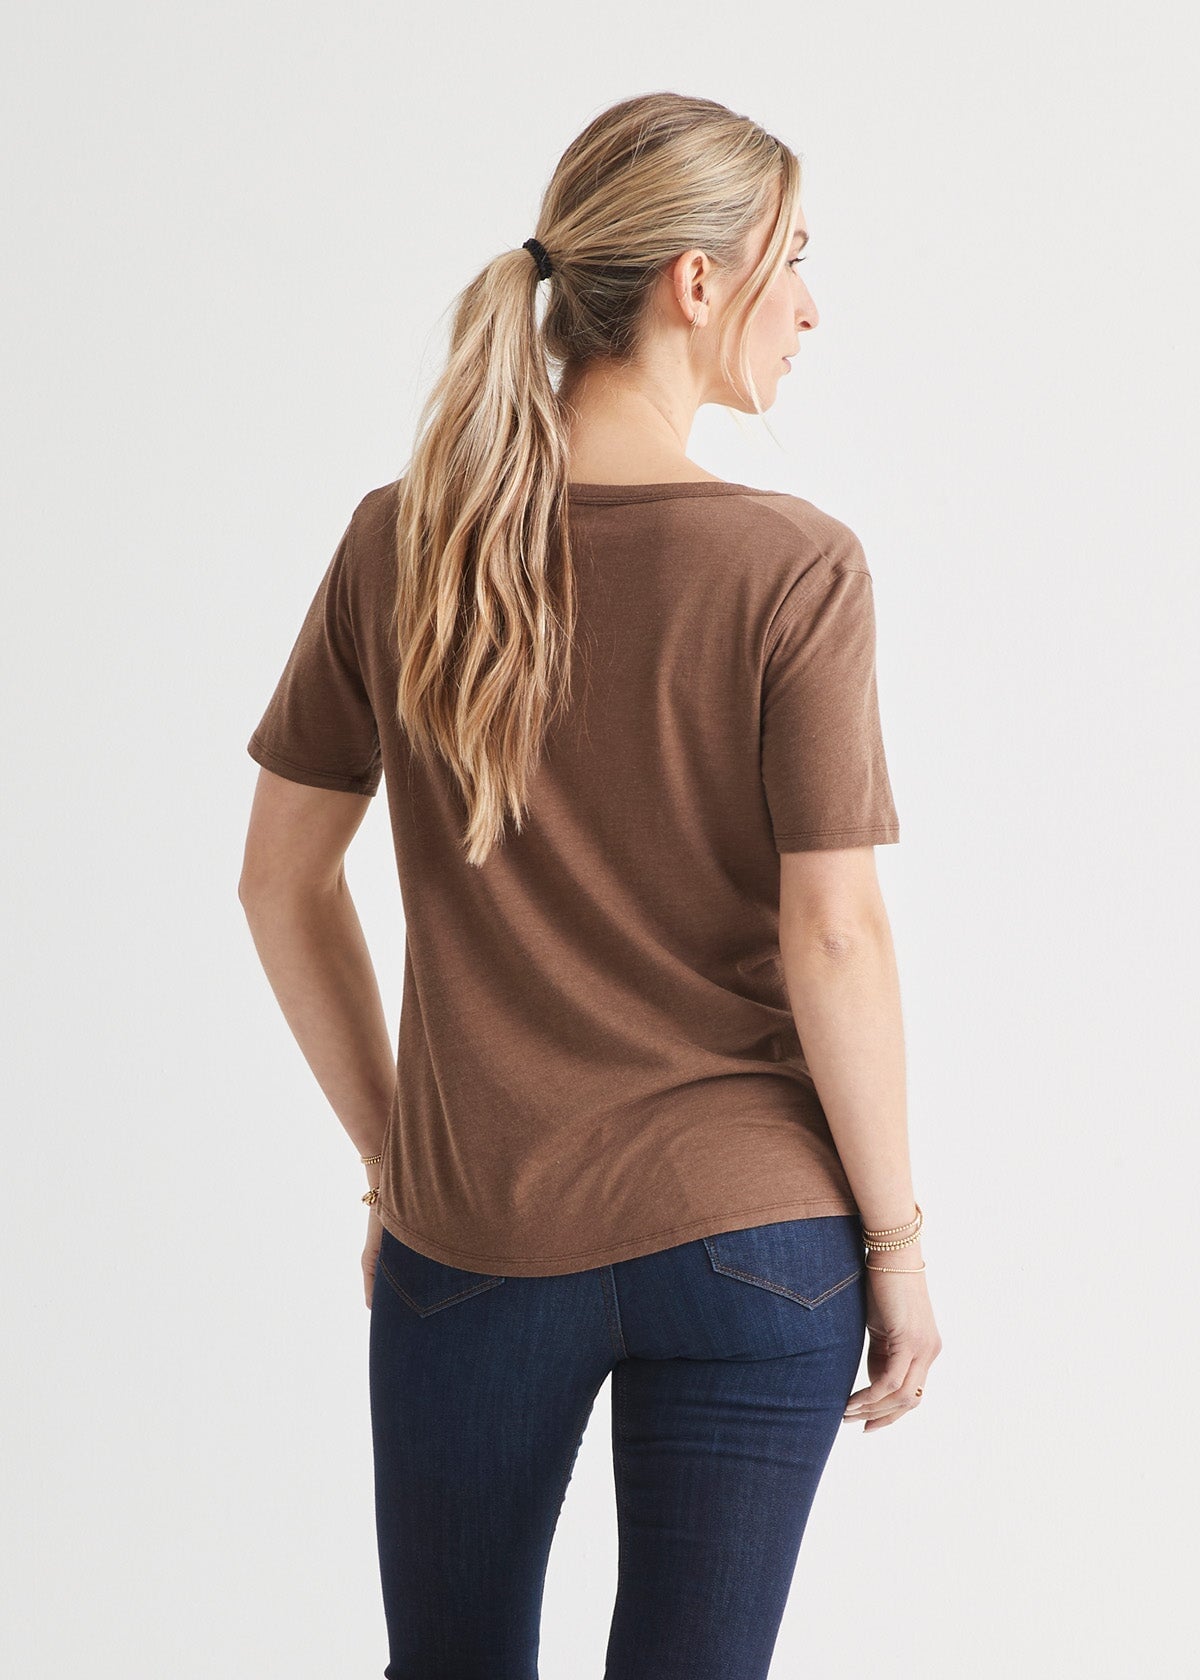 womens soft lightweight brown v-neck t-shirt back zoomed out